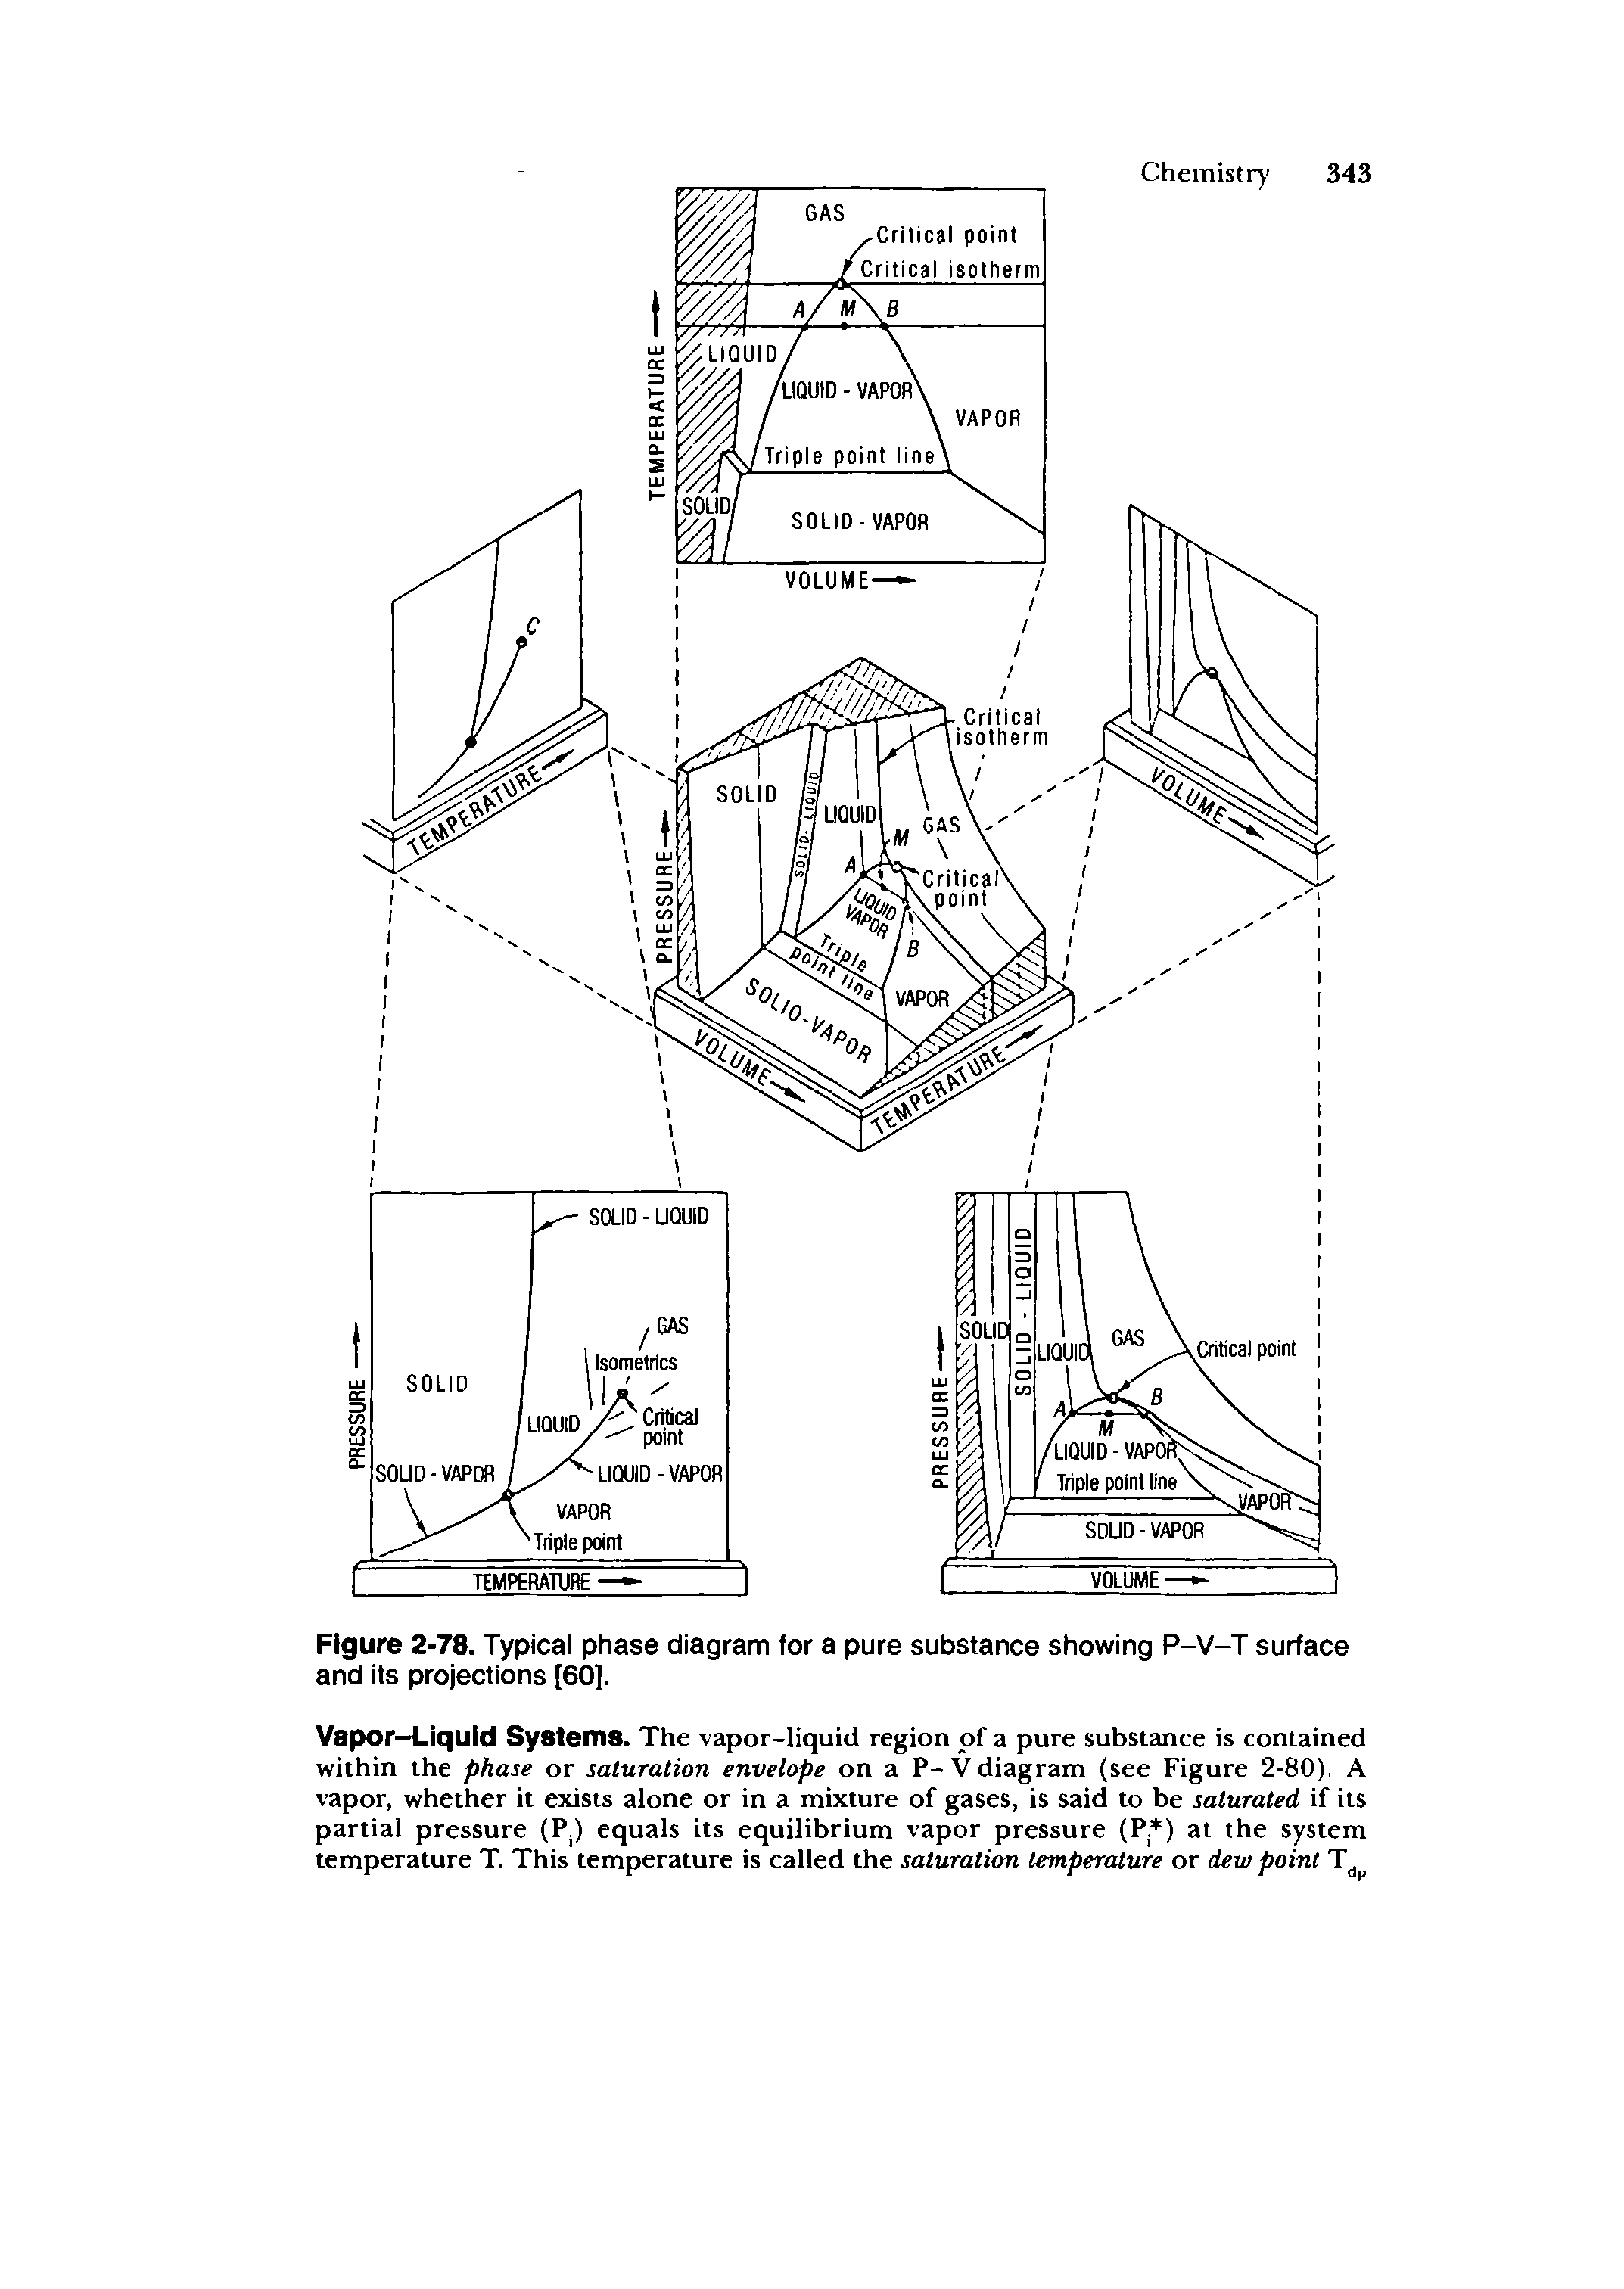 Figure 2-78. Typical phase diagram for a pure substance showing P-V-T surface and its projections [60],...